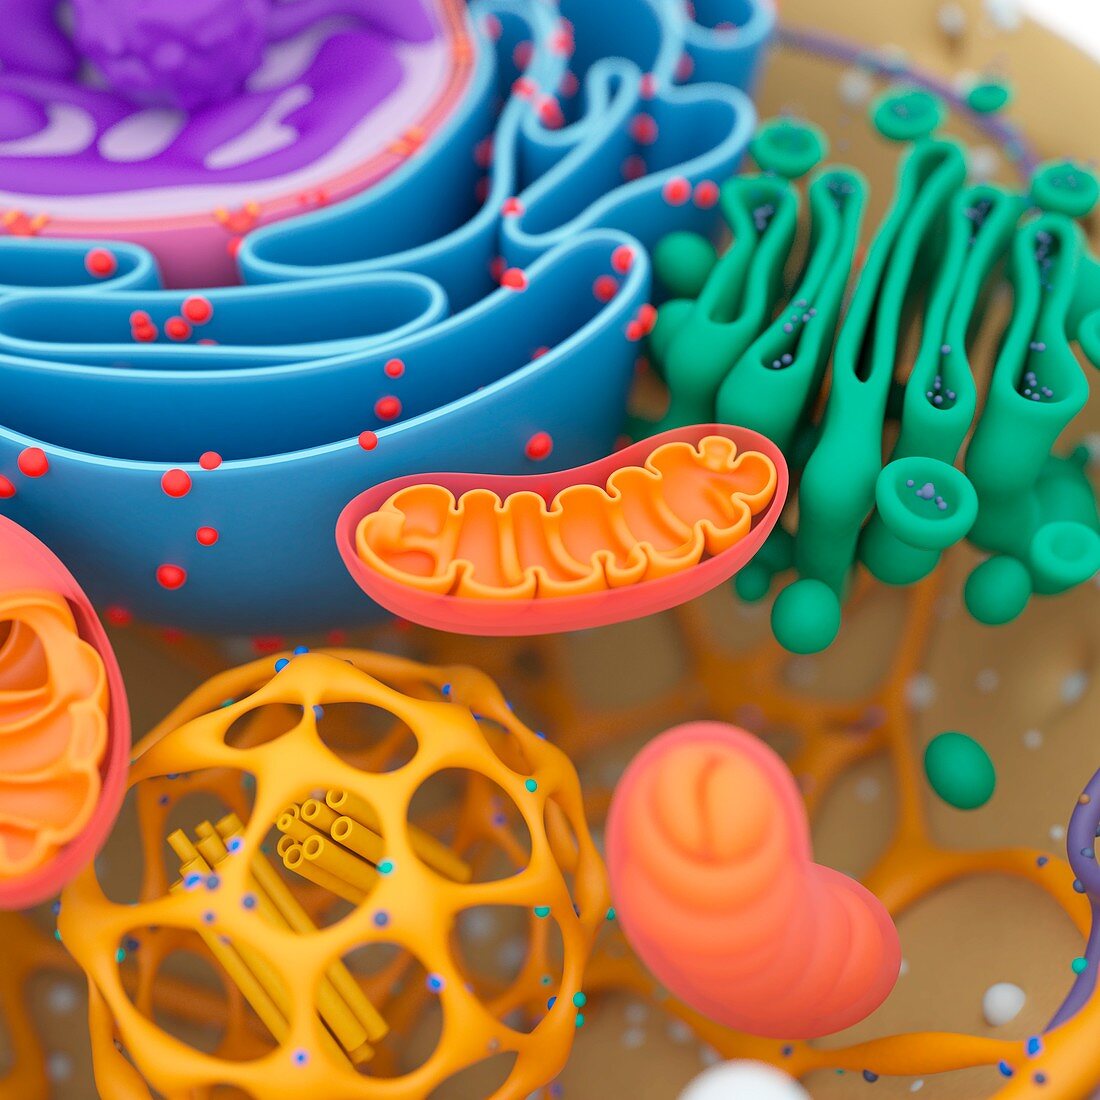 Cell structure detail, illustration